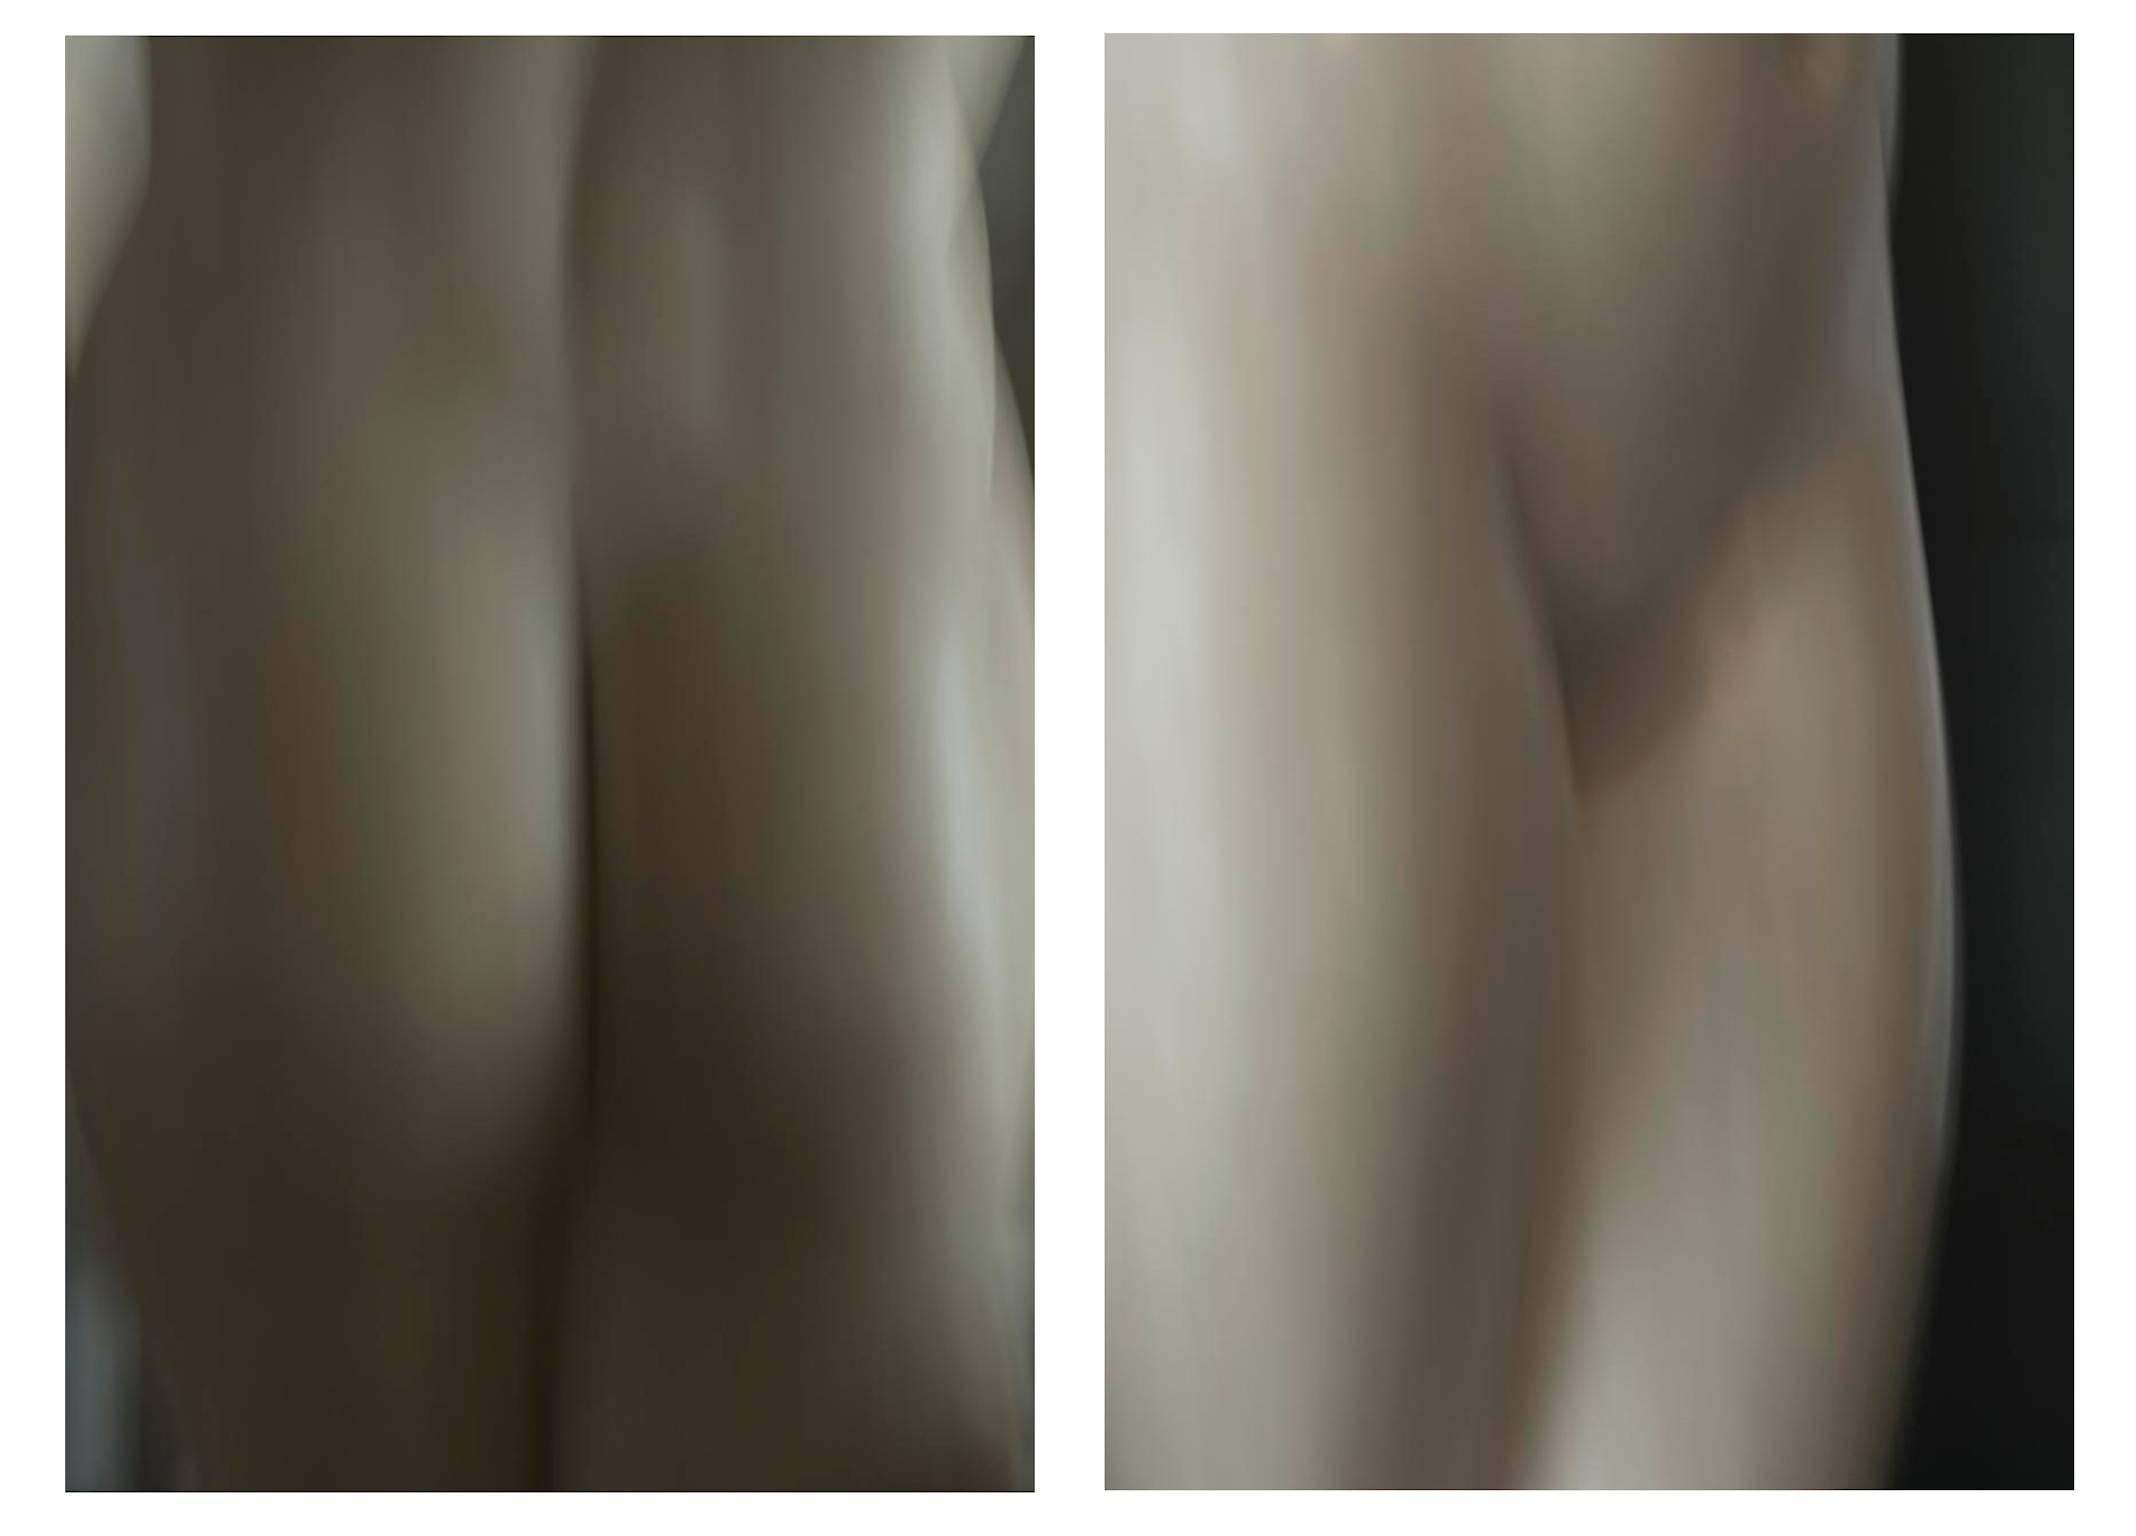 Luca Artioli Color Photograph - Roman Statue, Study II and I, Diptych. Nudes. Limited edition color photograph